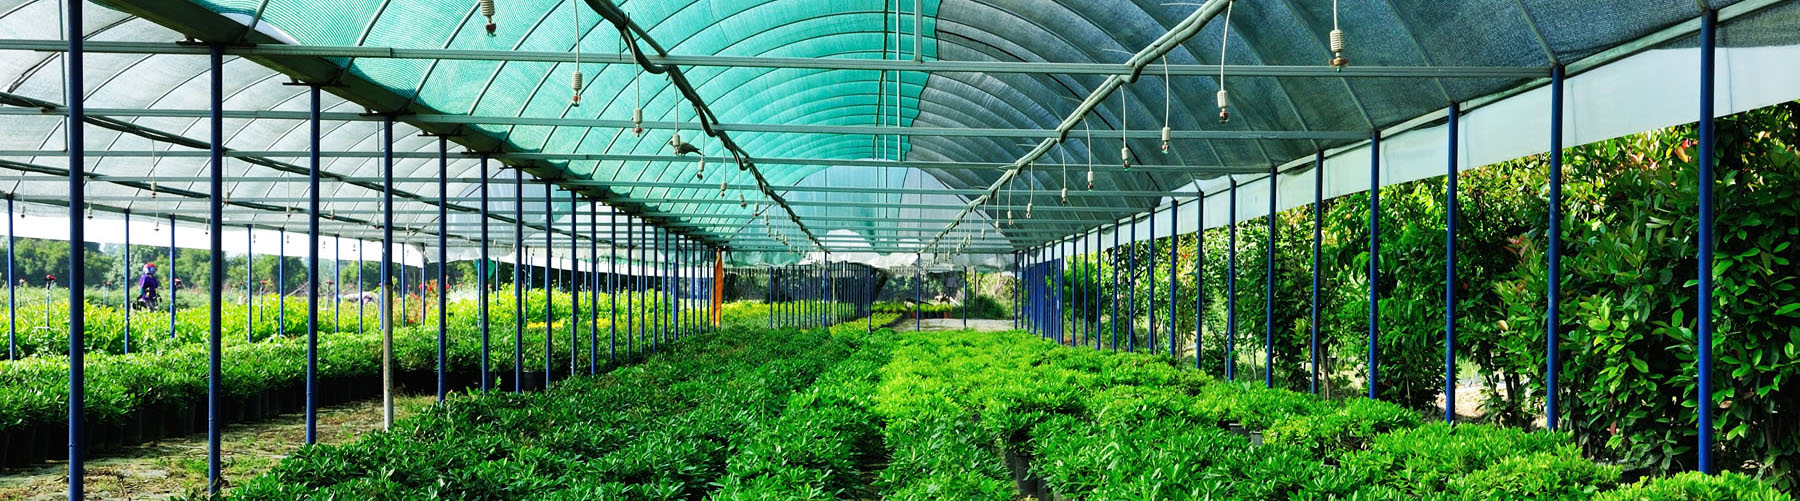 A greenhouse full of green plants.